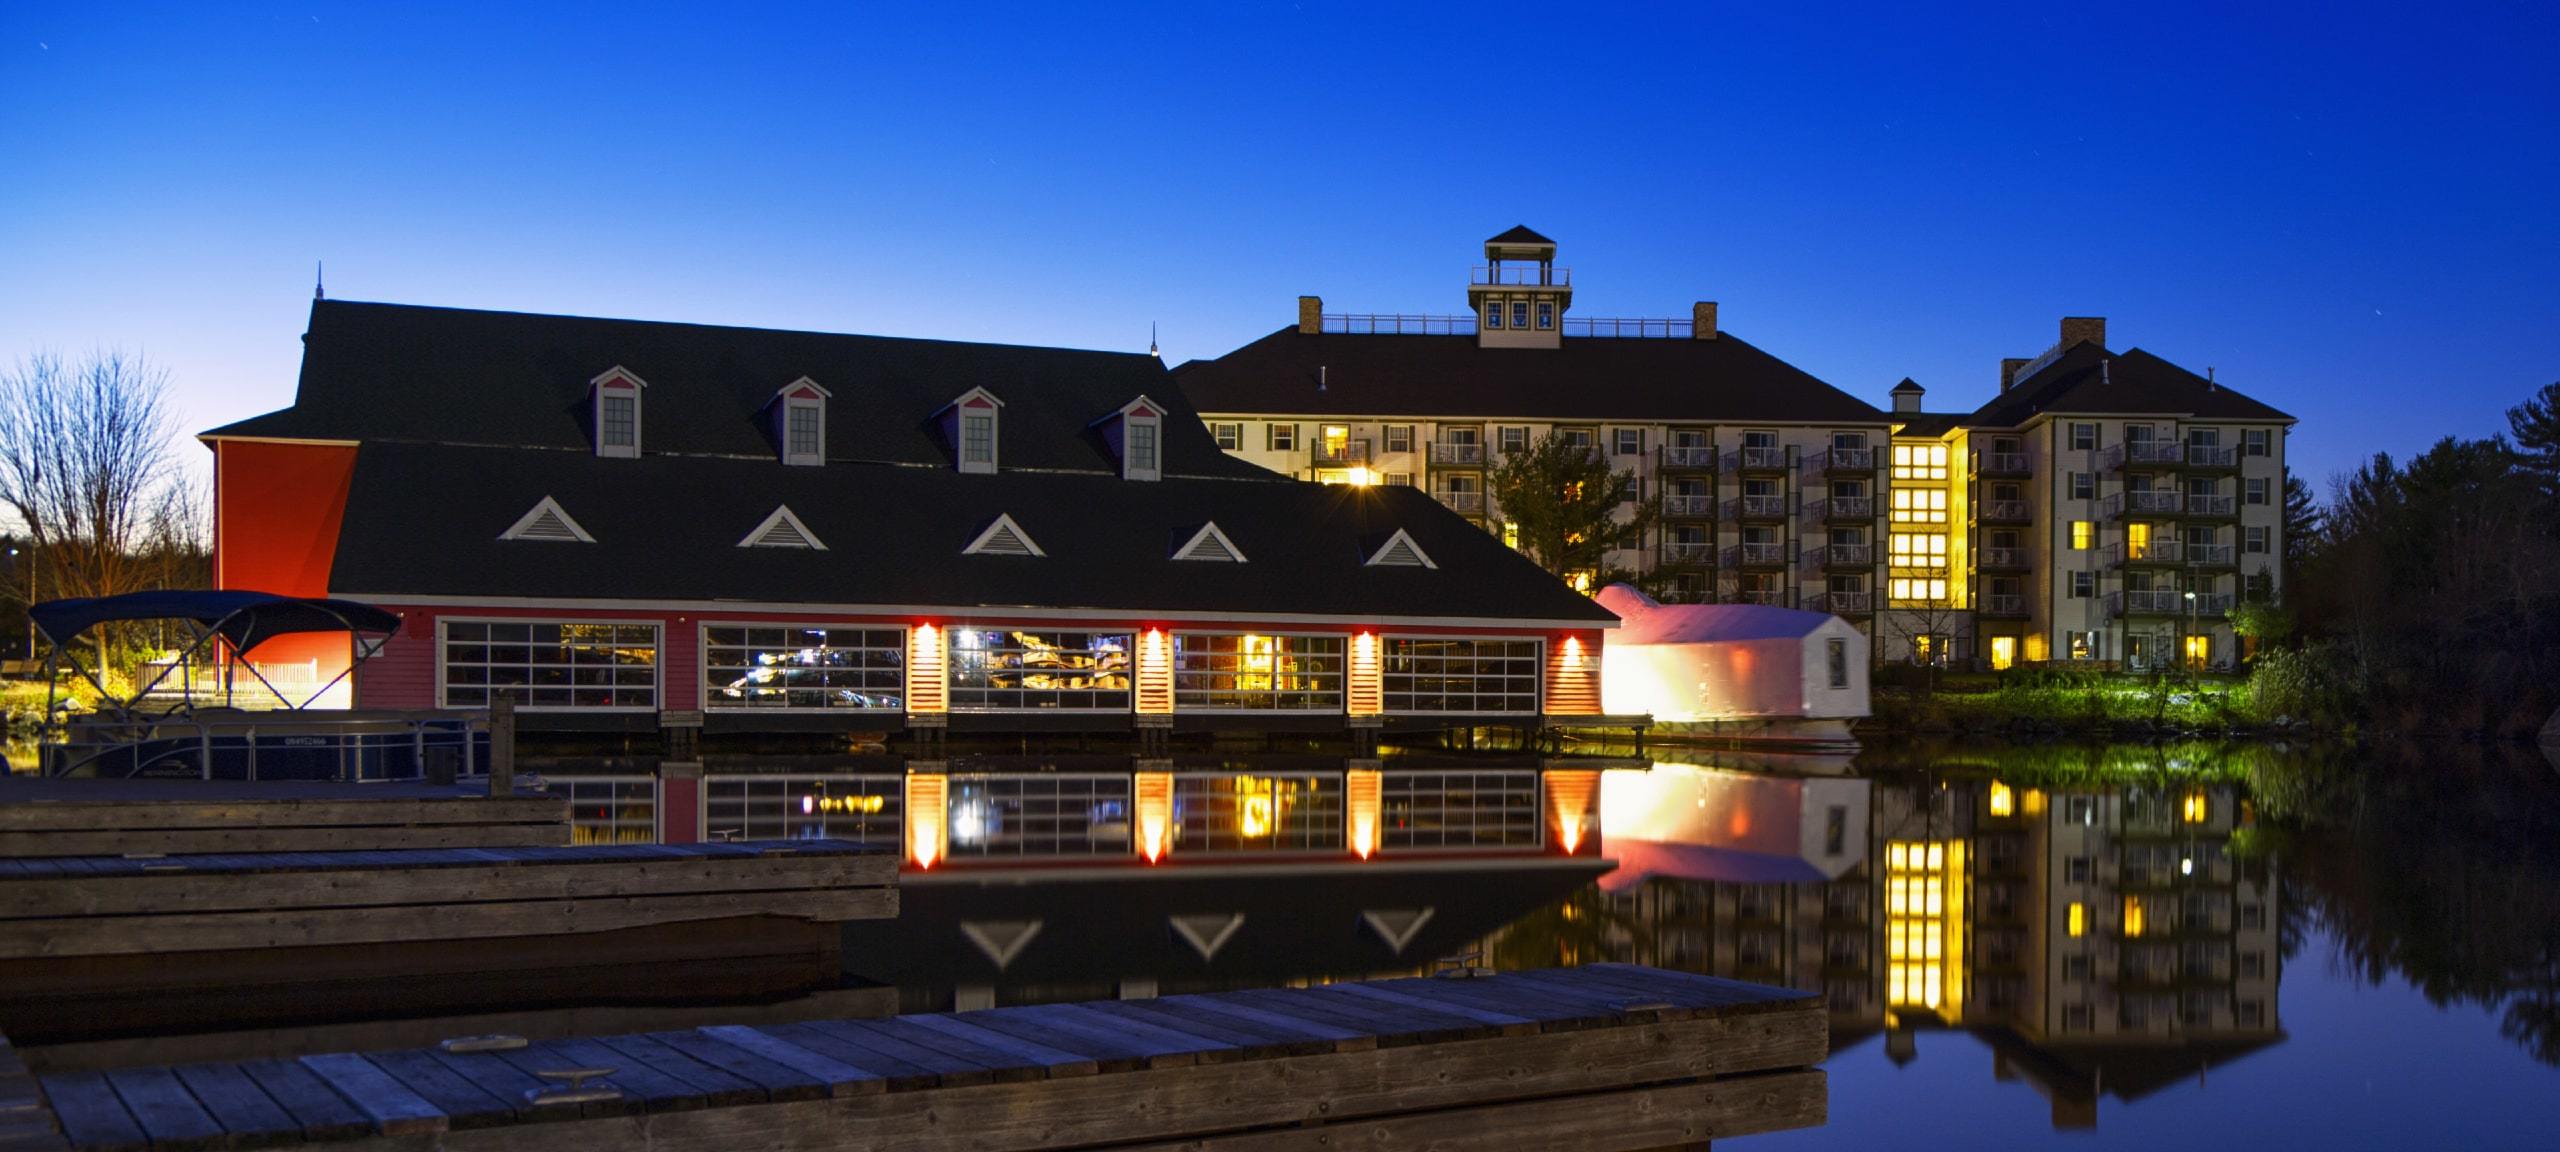 Night view of dock and condos in Gravenhurst, ON